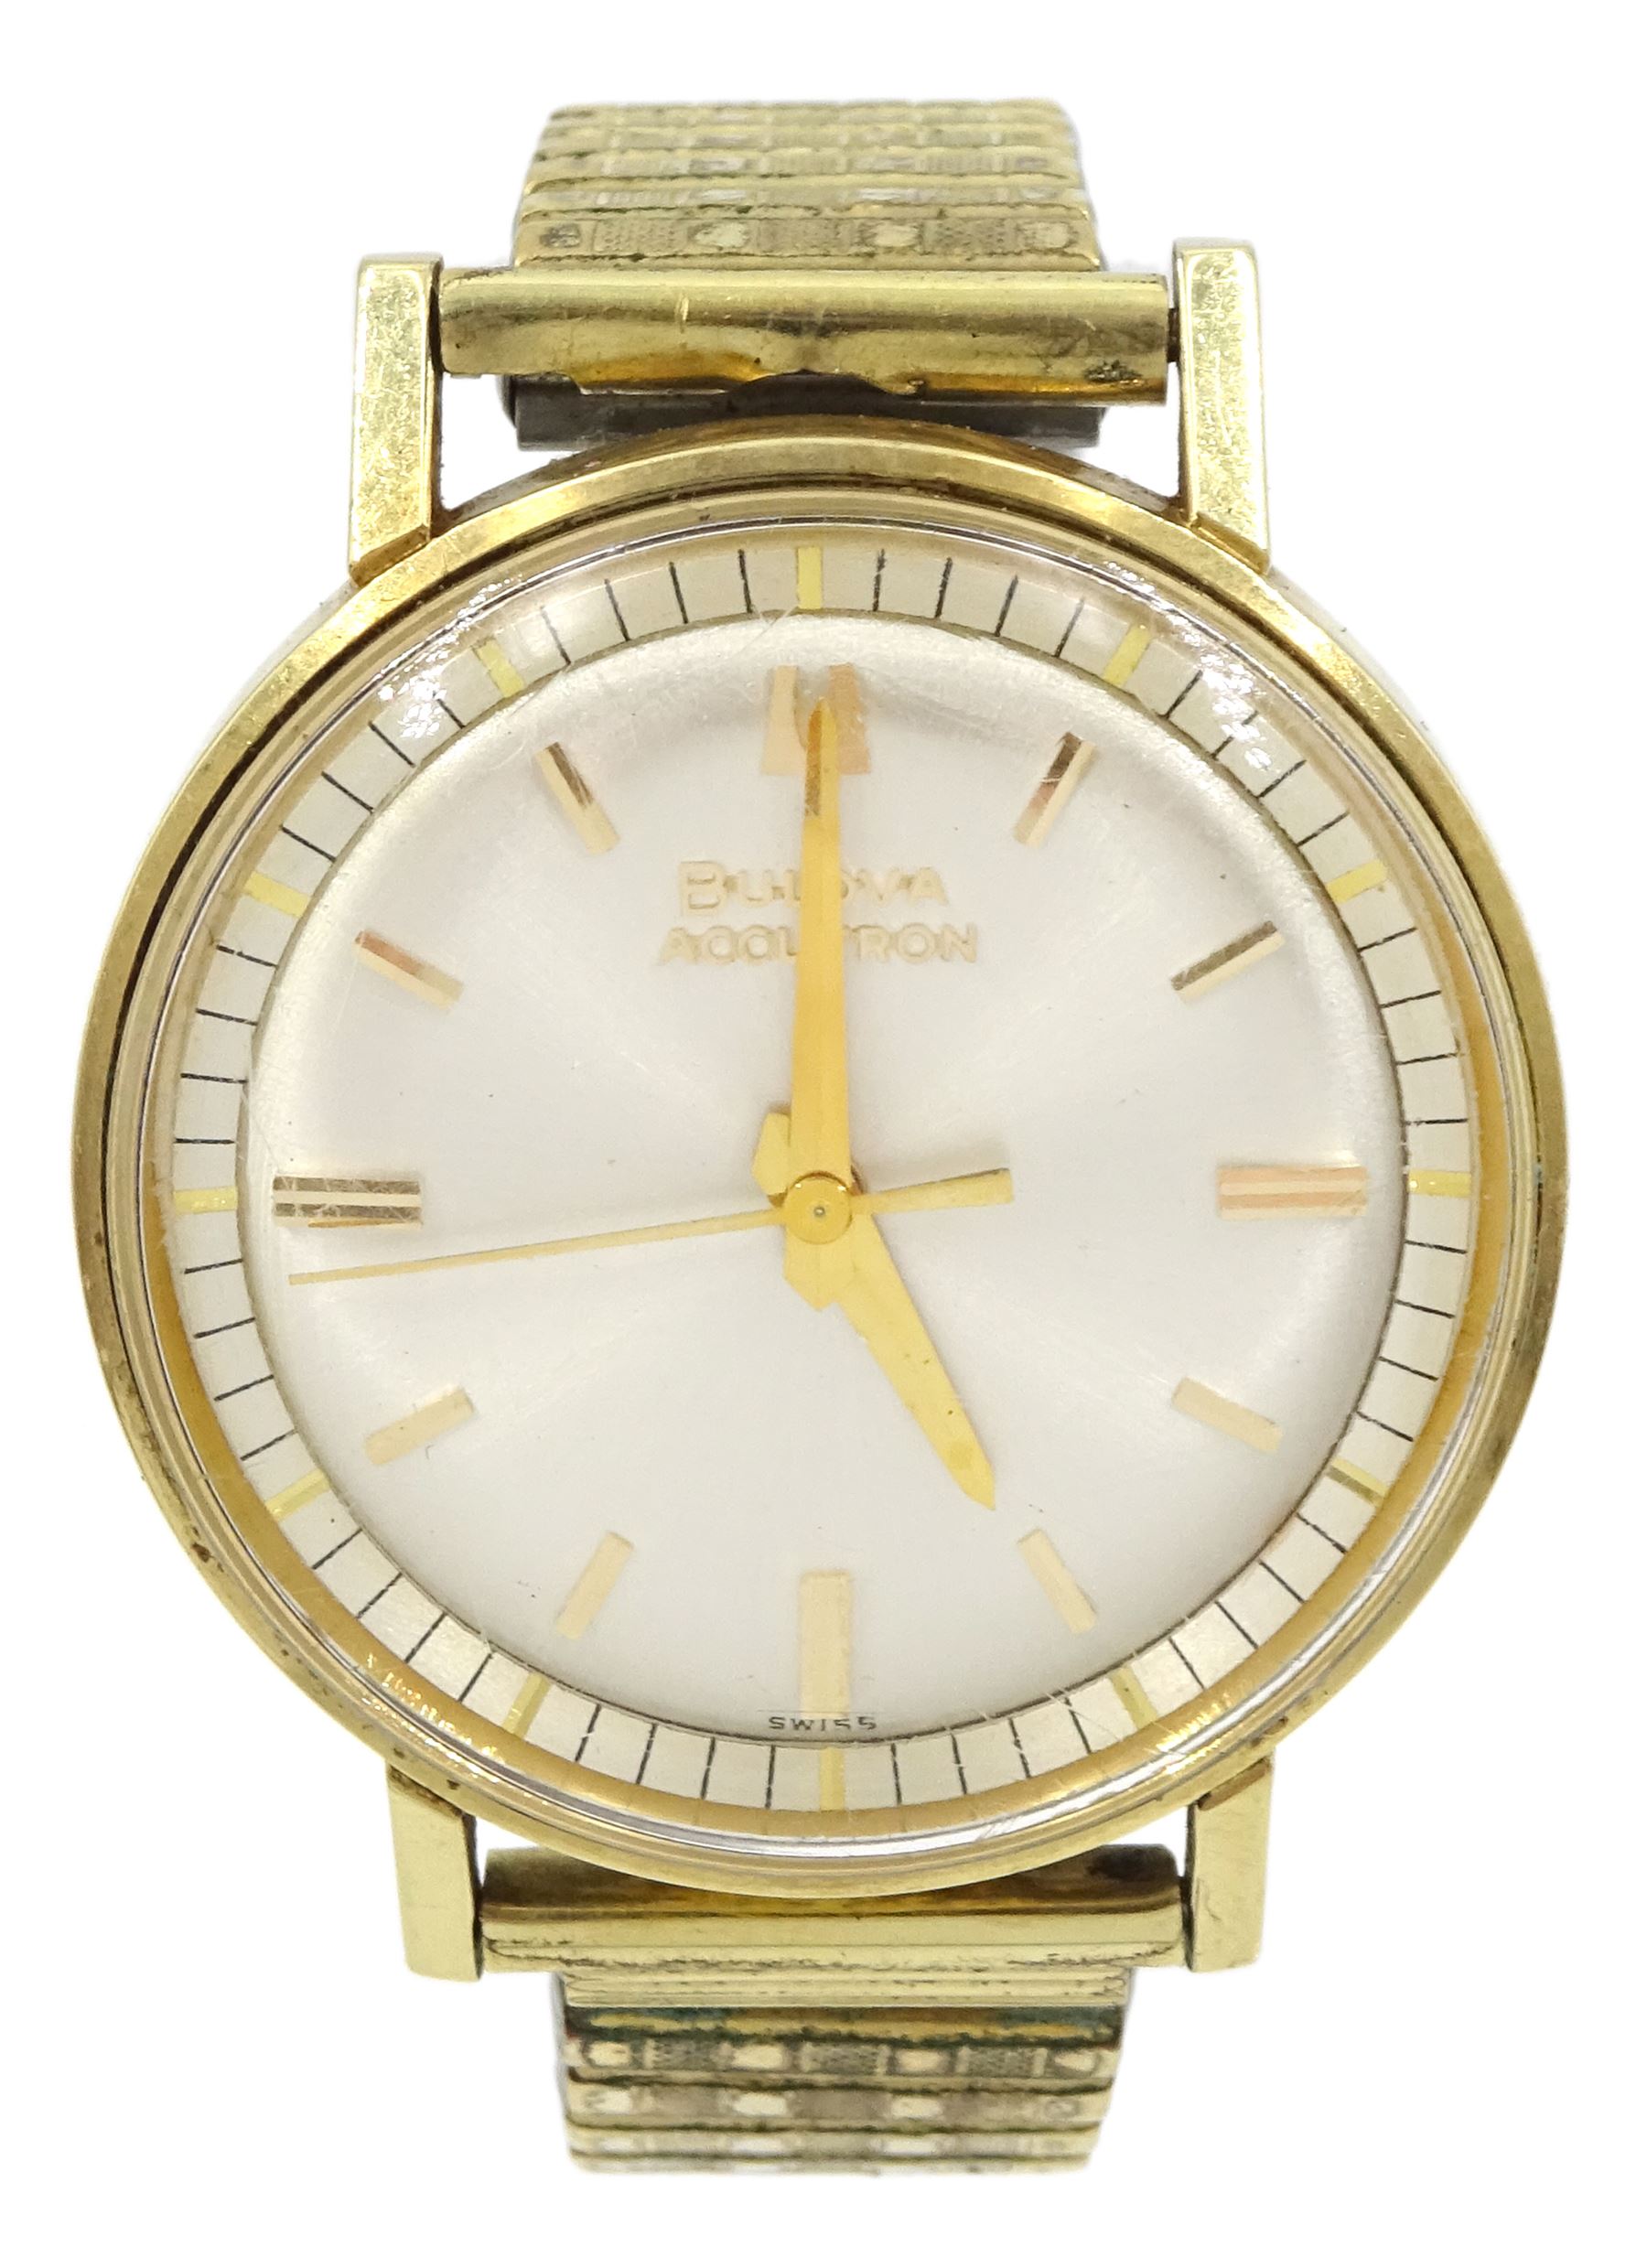 DS Bulova Accutron M4 gold-plated and stainless steel gentleman's ...